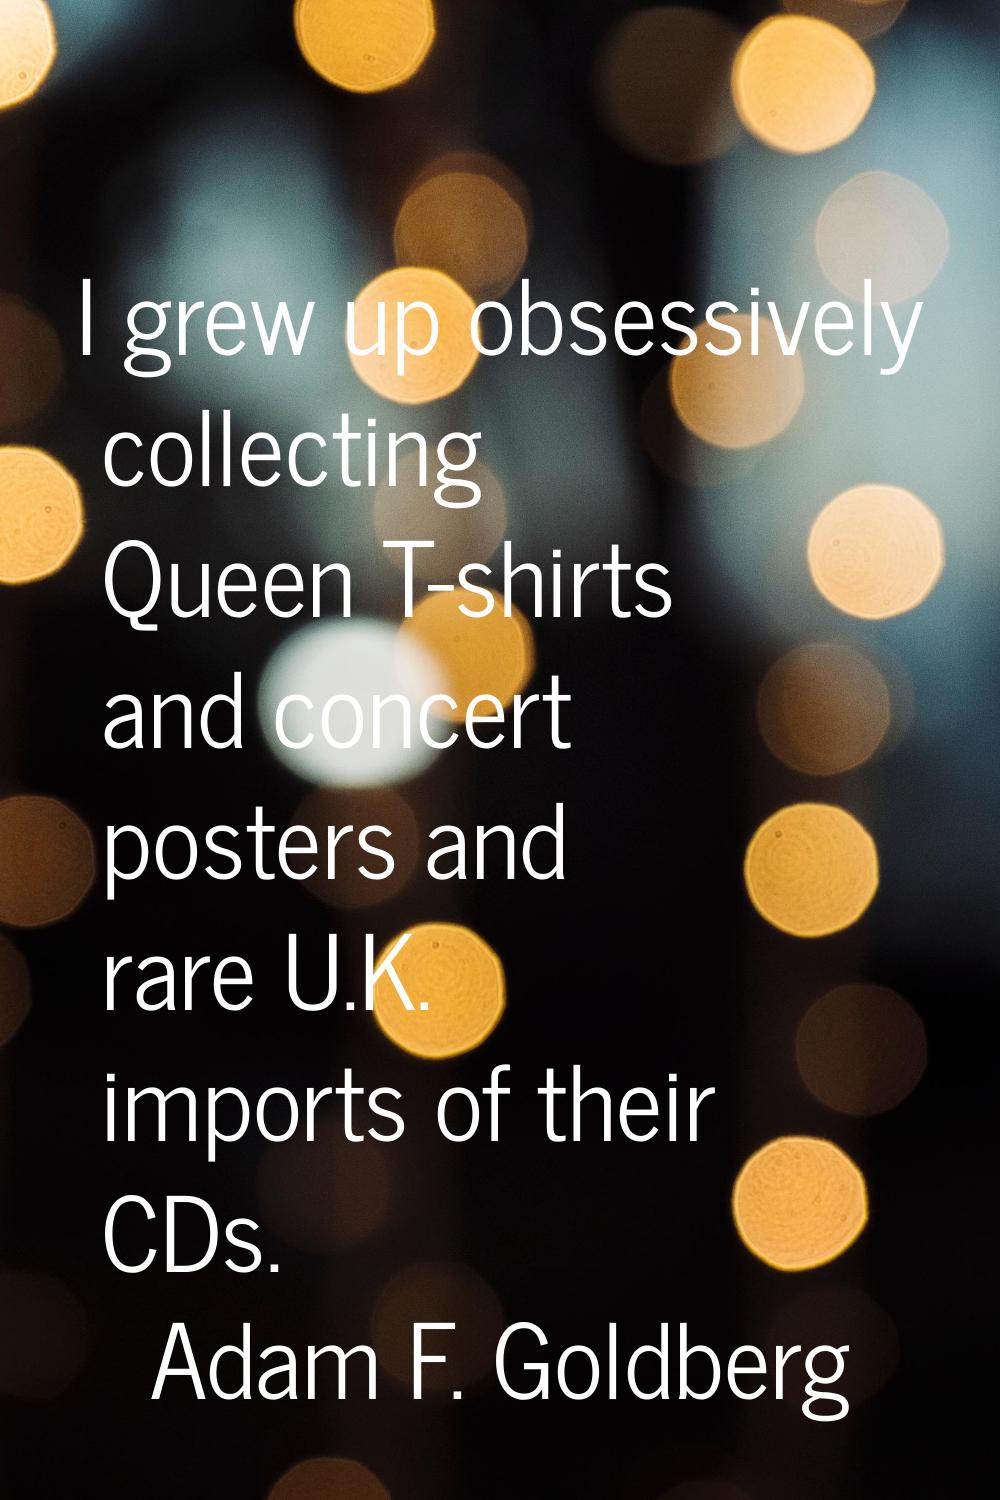 I grew up obsessively collecting Queen T-shirts and concert posters and rare U.K. imports of their 